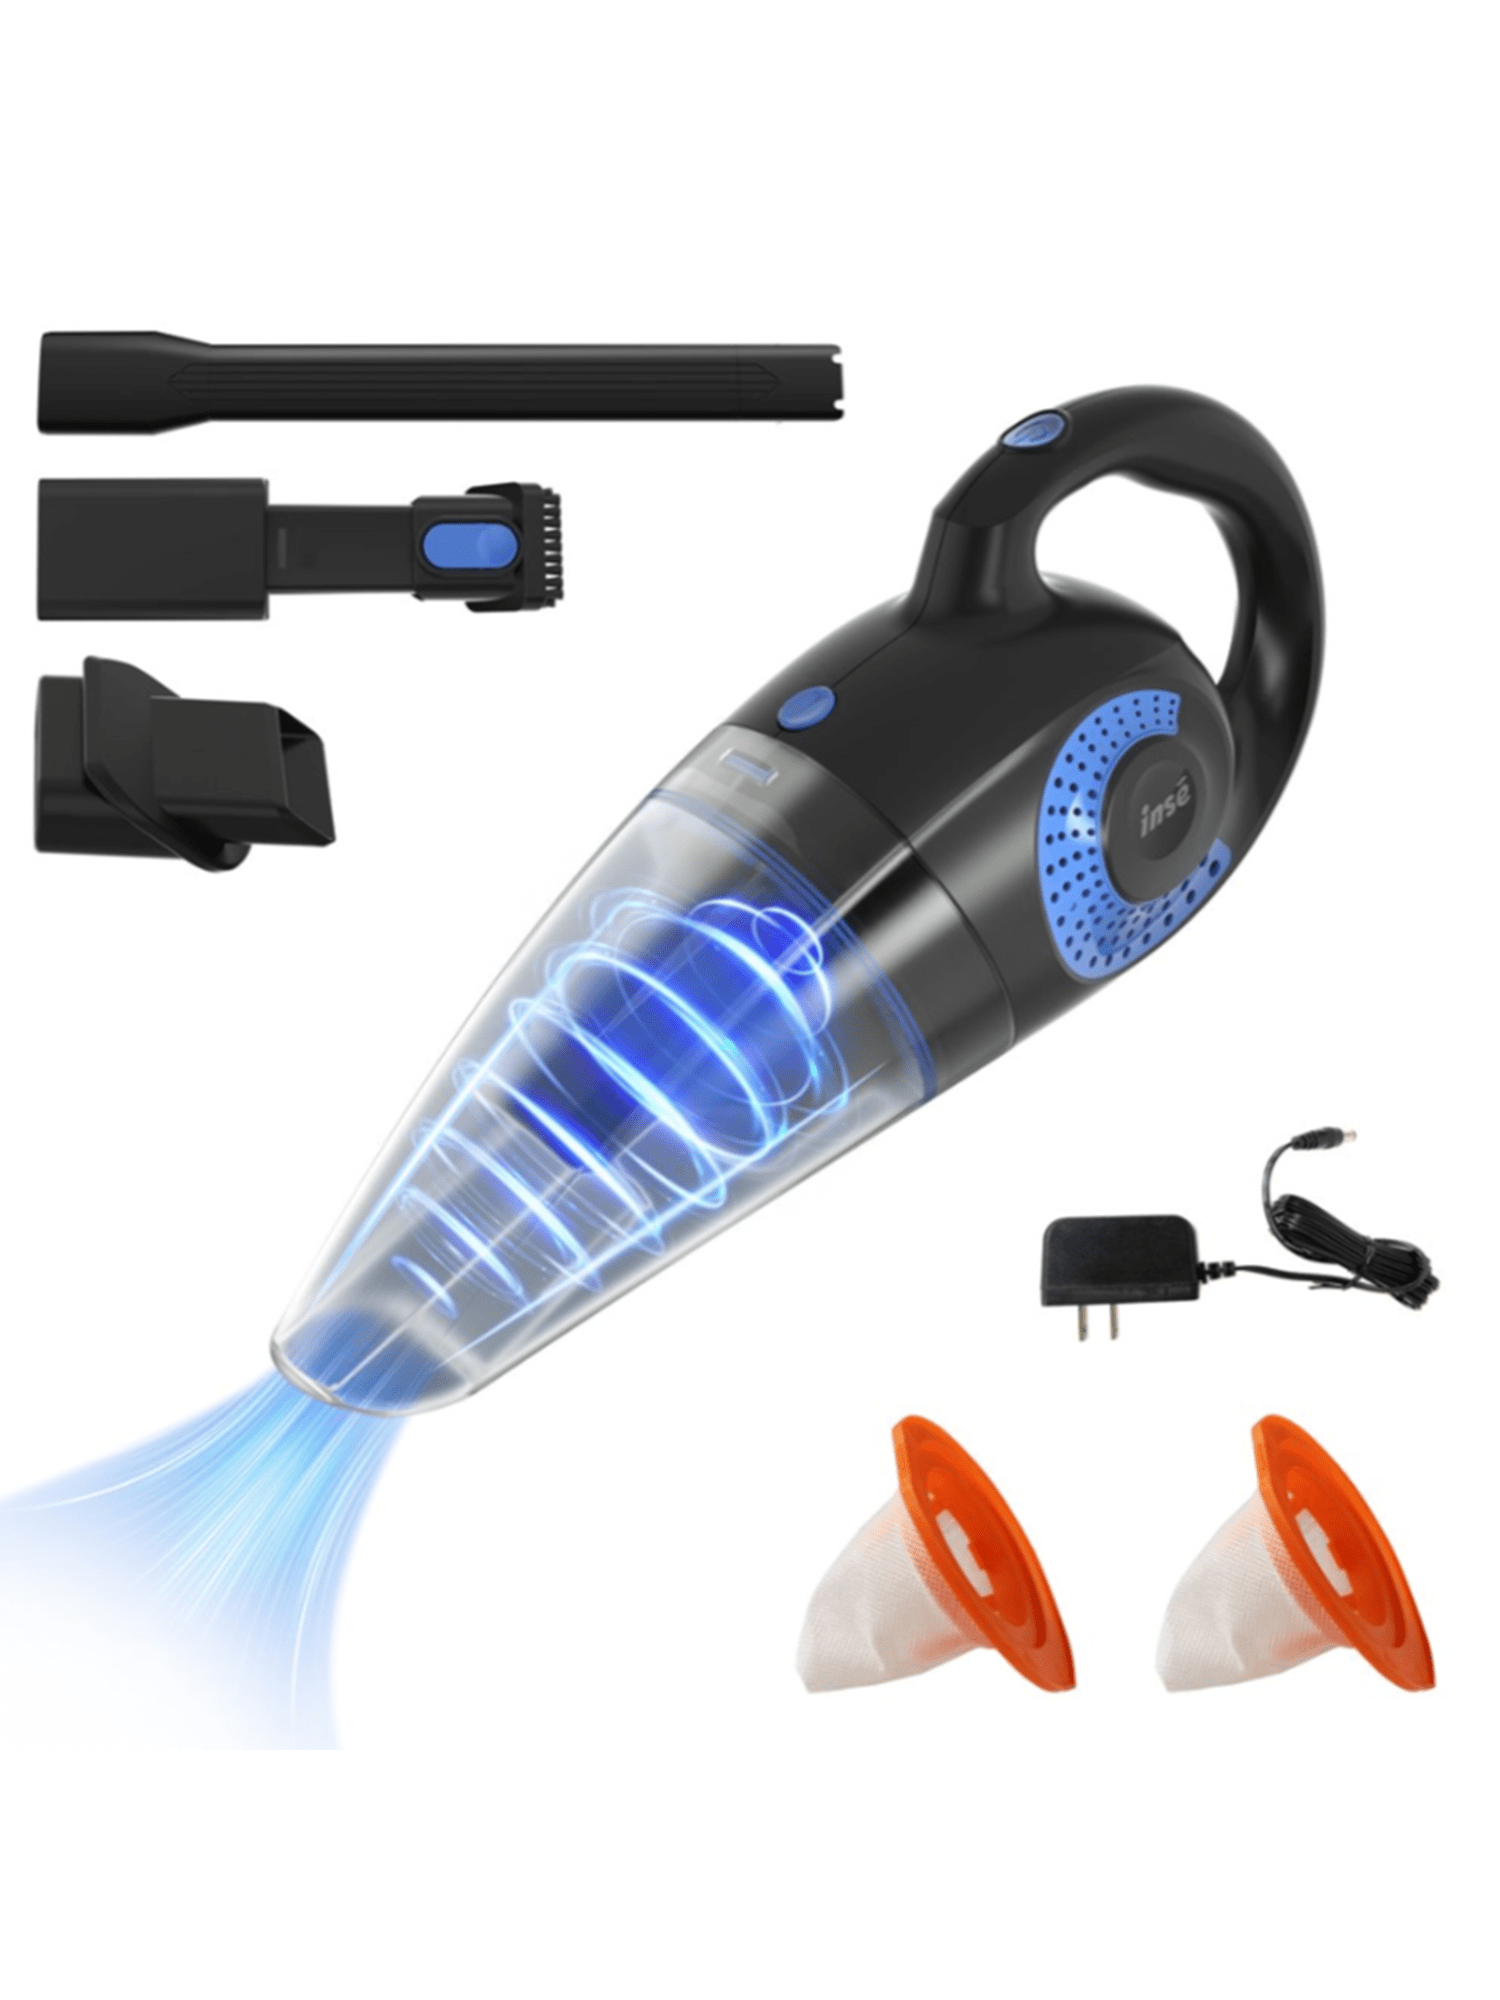 INSE Cordless Car Vacuum Cleaner Wet Dry Lightweight Rechargeable Handy Vacuum for Car, Home, Pet, Hair